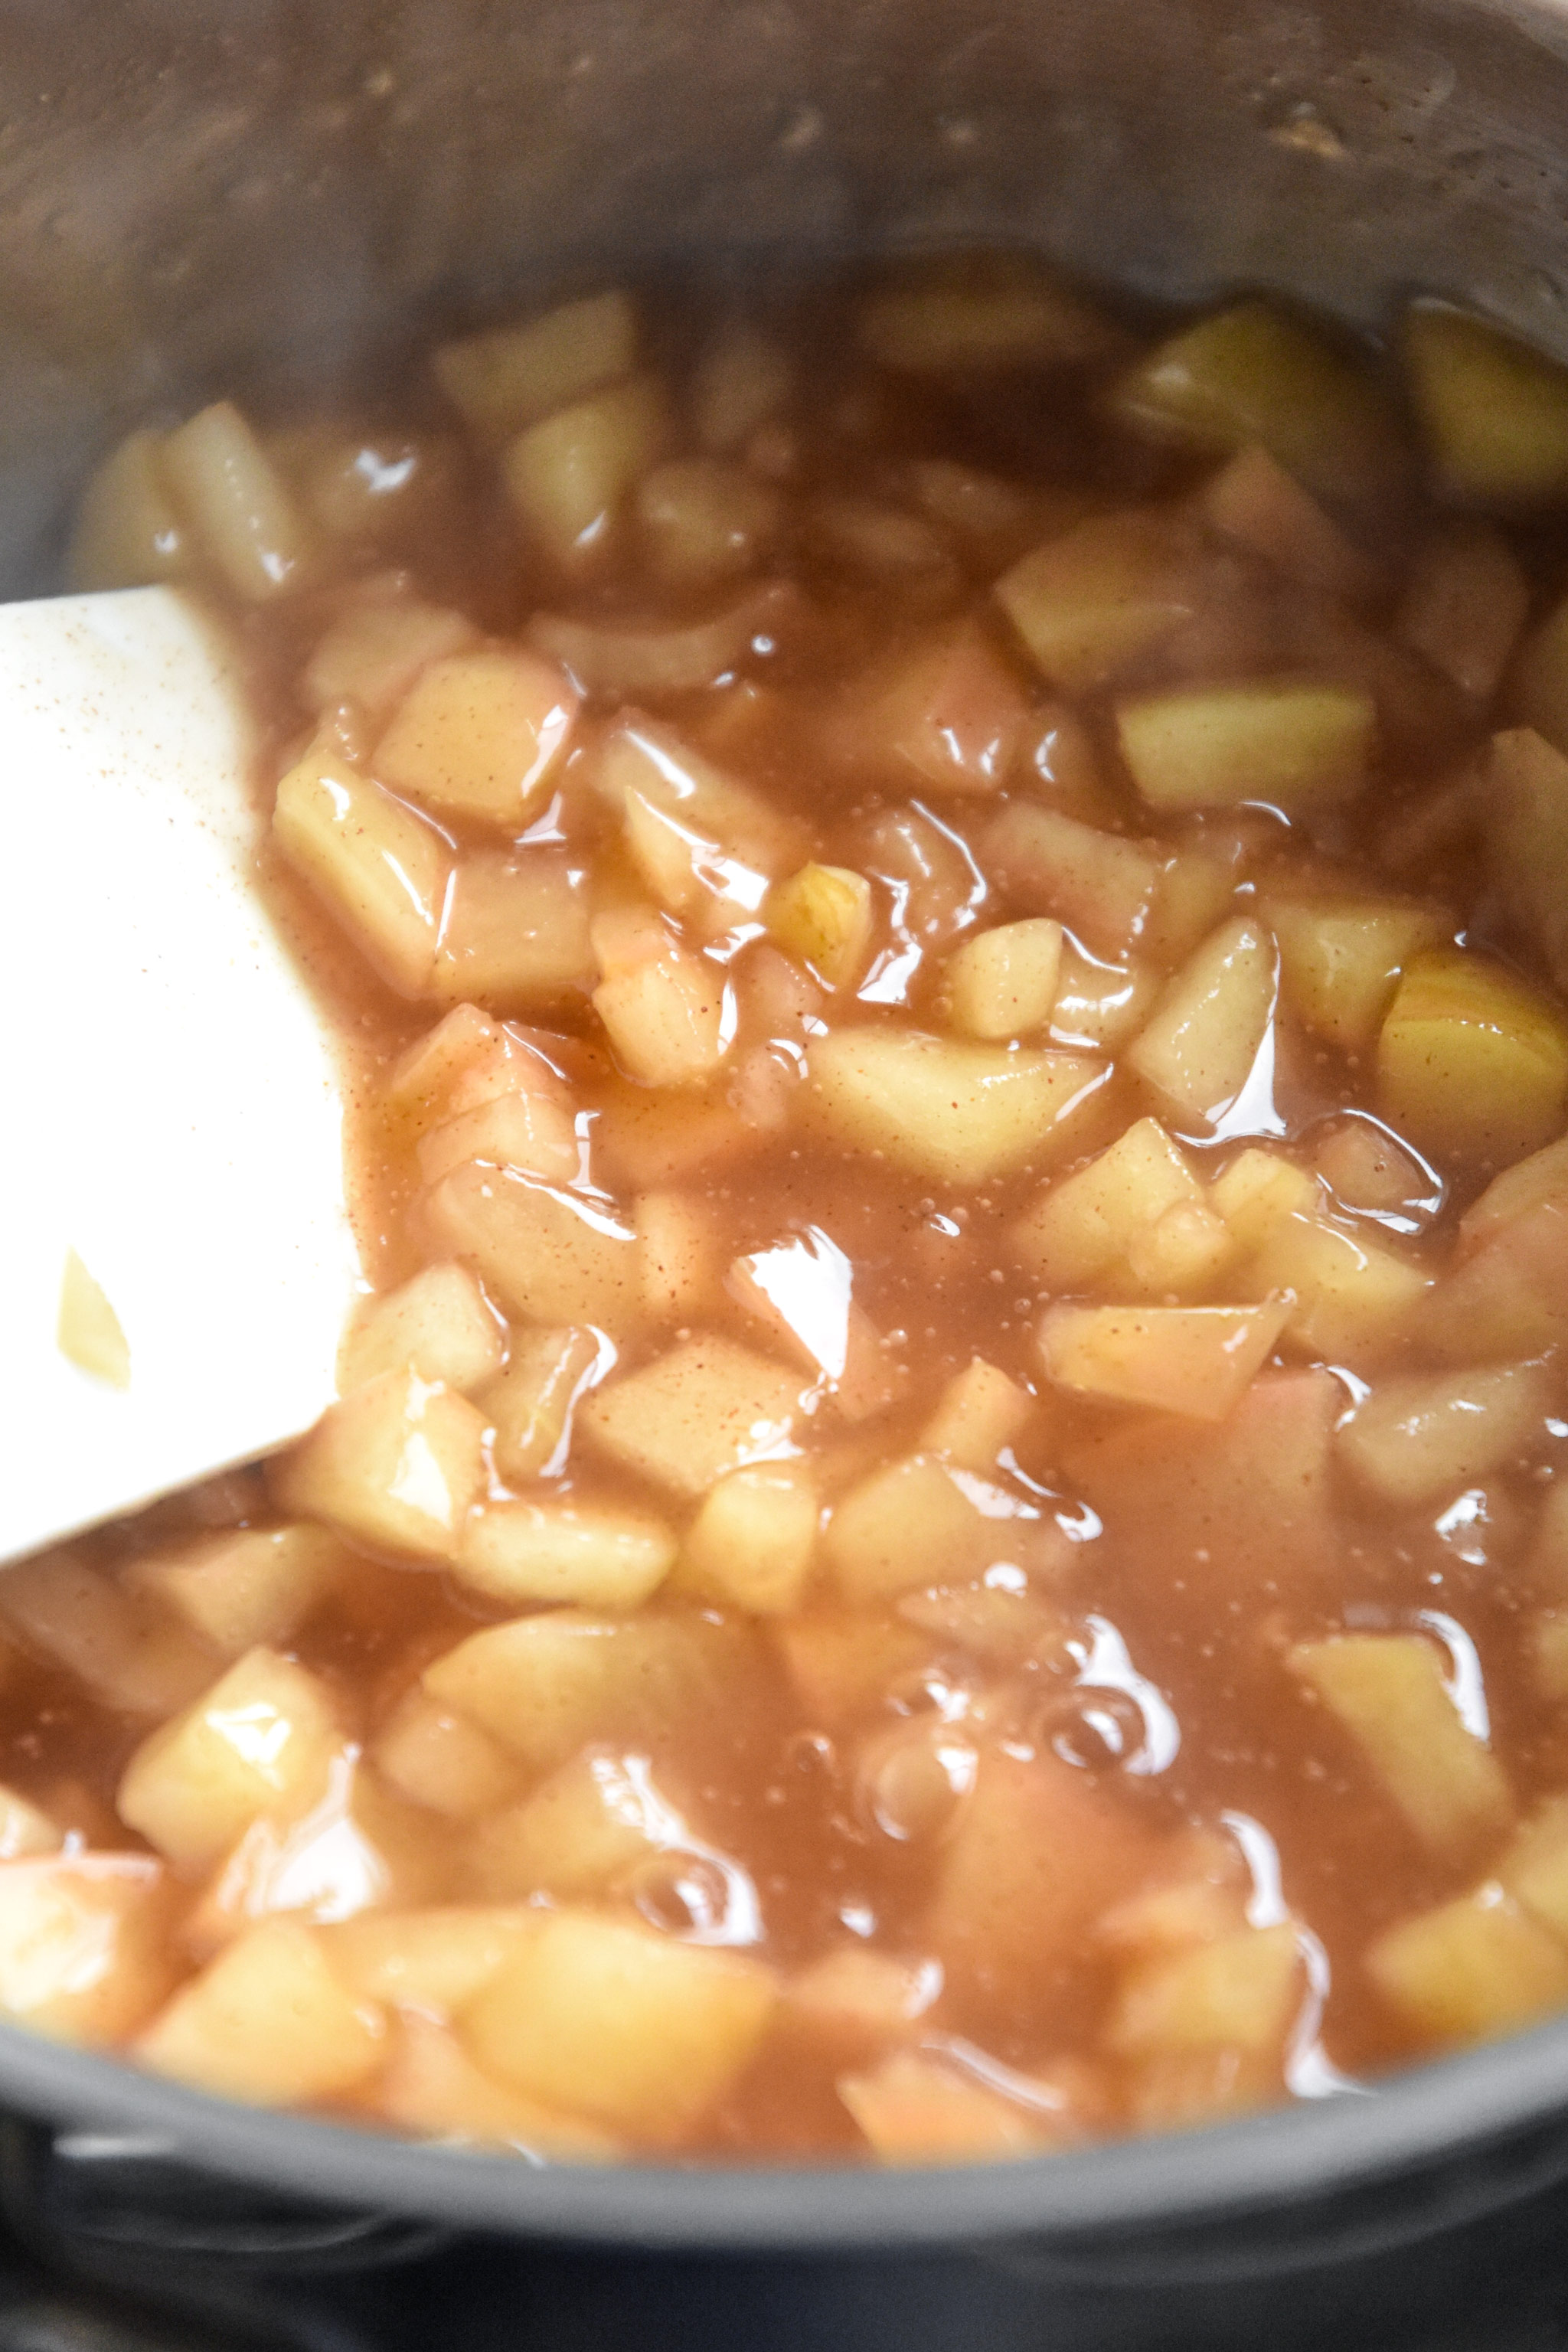 apples and cinnamon cooked in a small saucepan